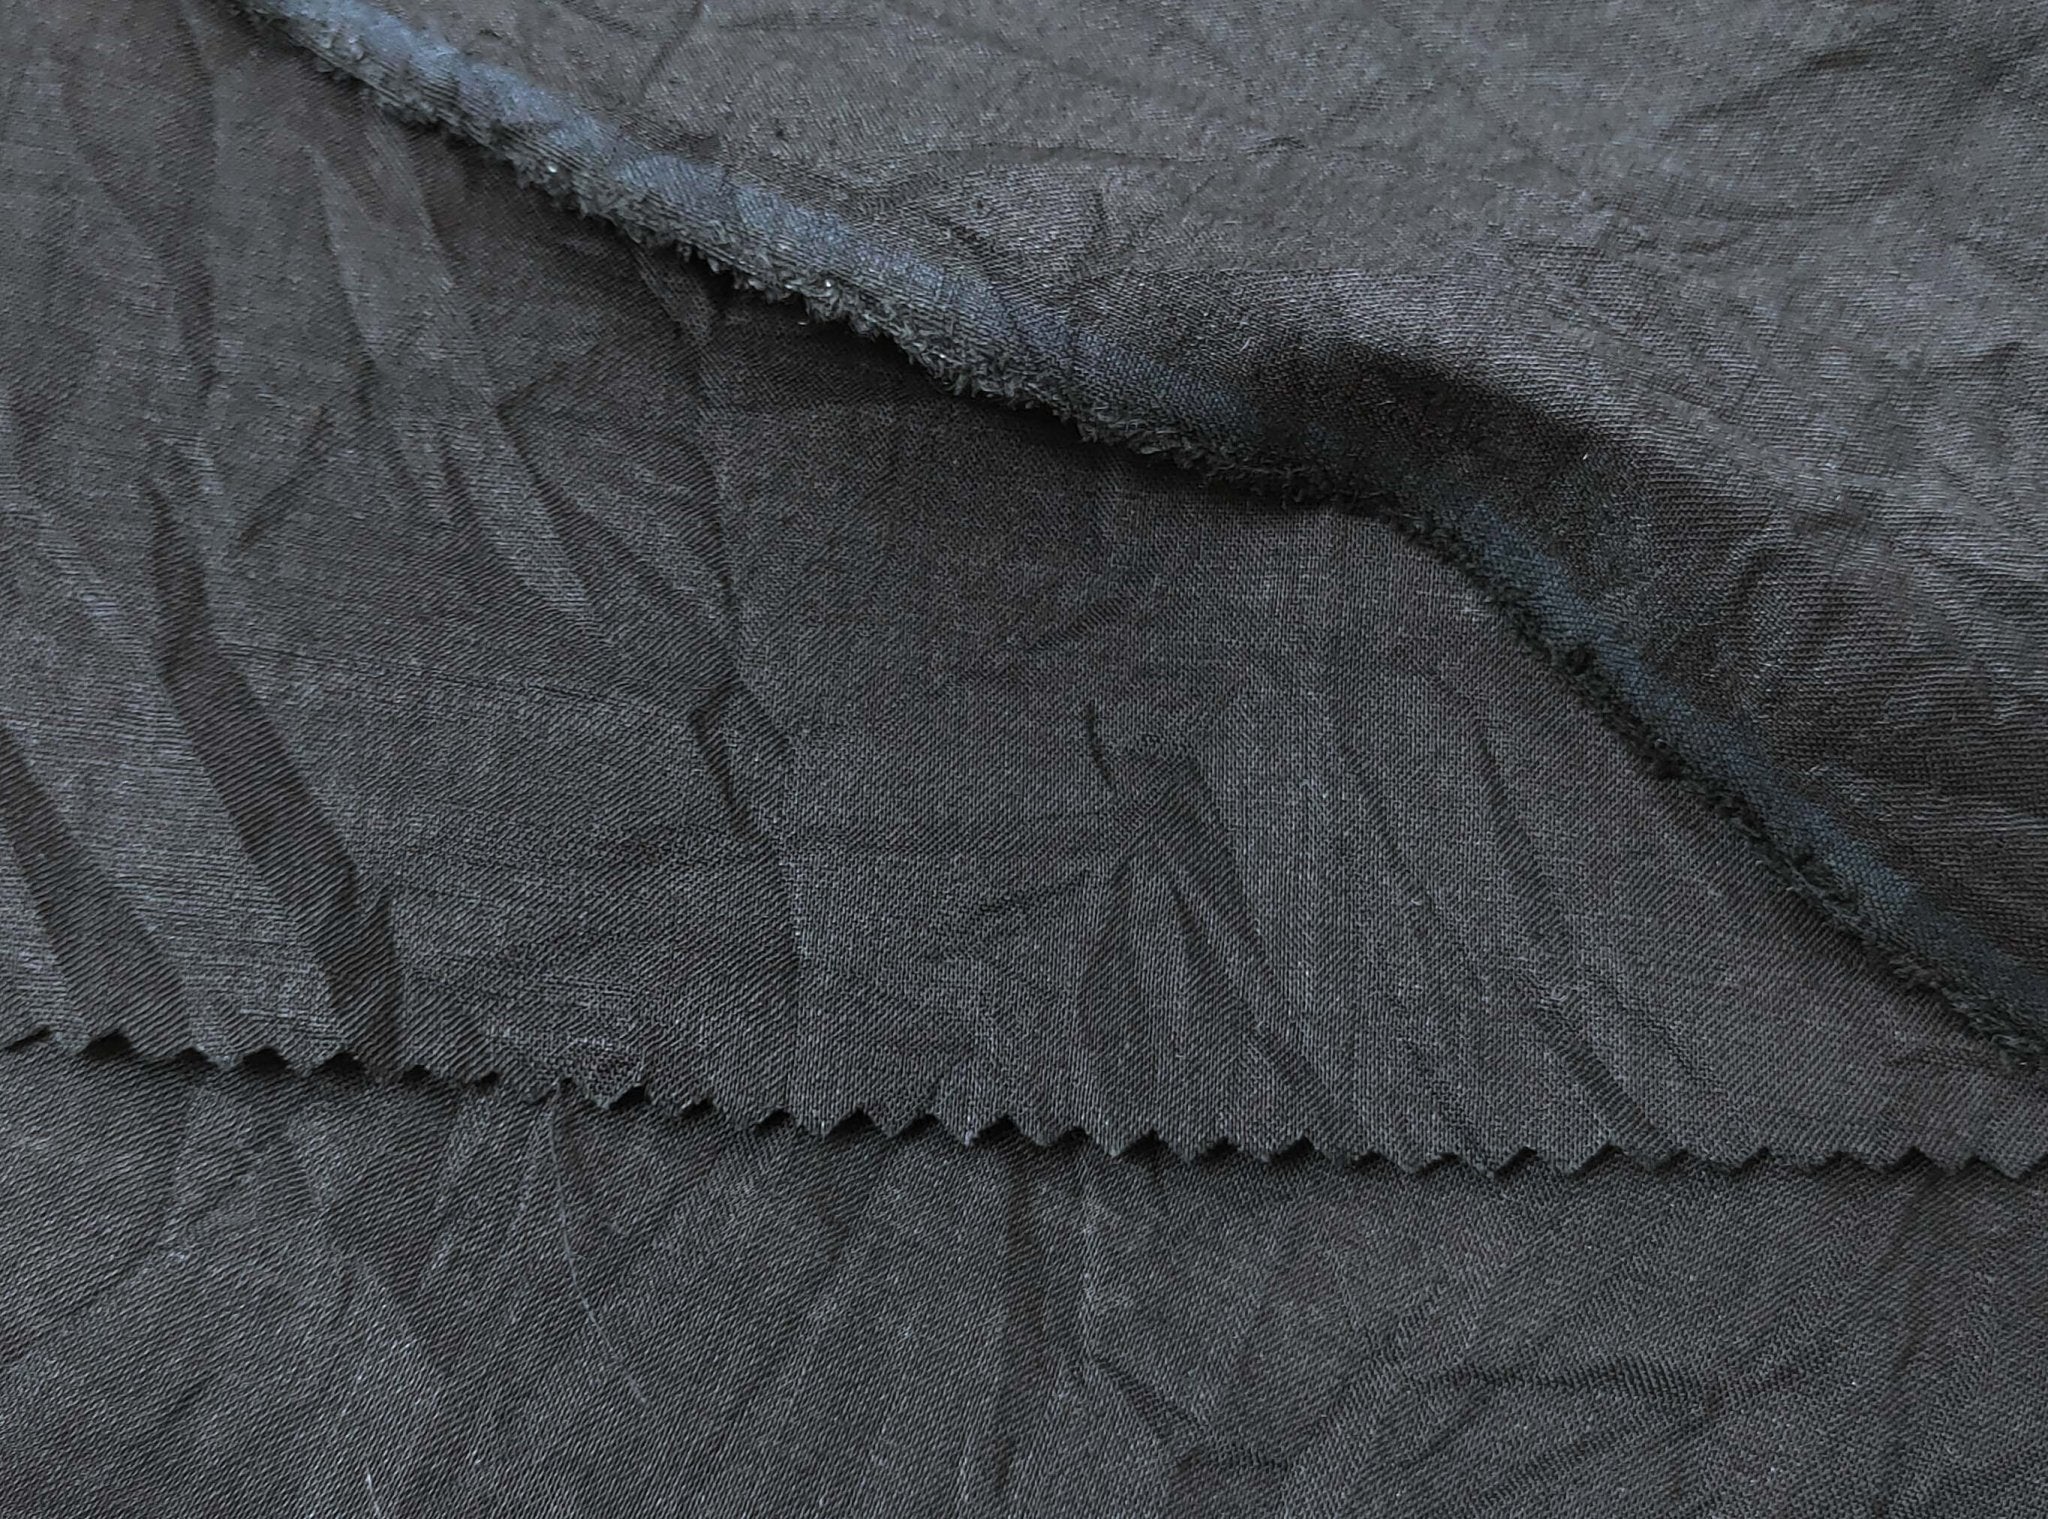 Ramie Polyester Fabric - Black Color with Crease Wrinkle Effect, Lightweight 7863 - The Linen Lab - Black